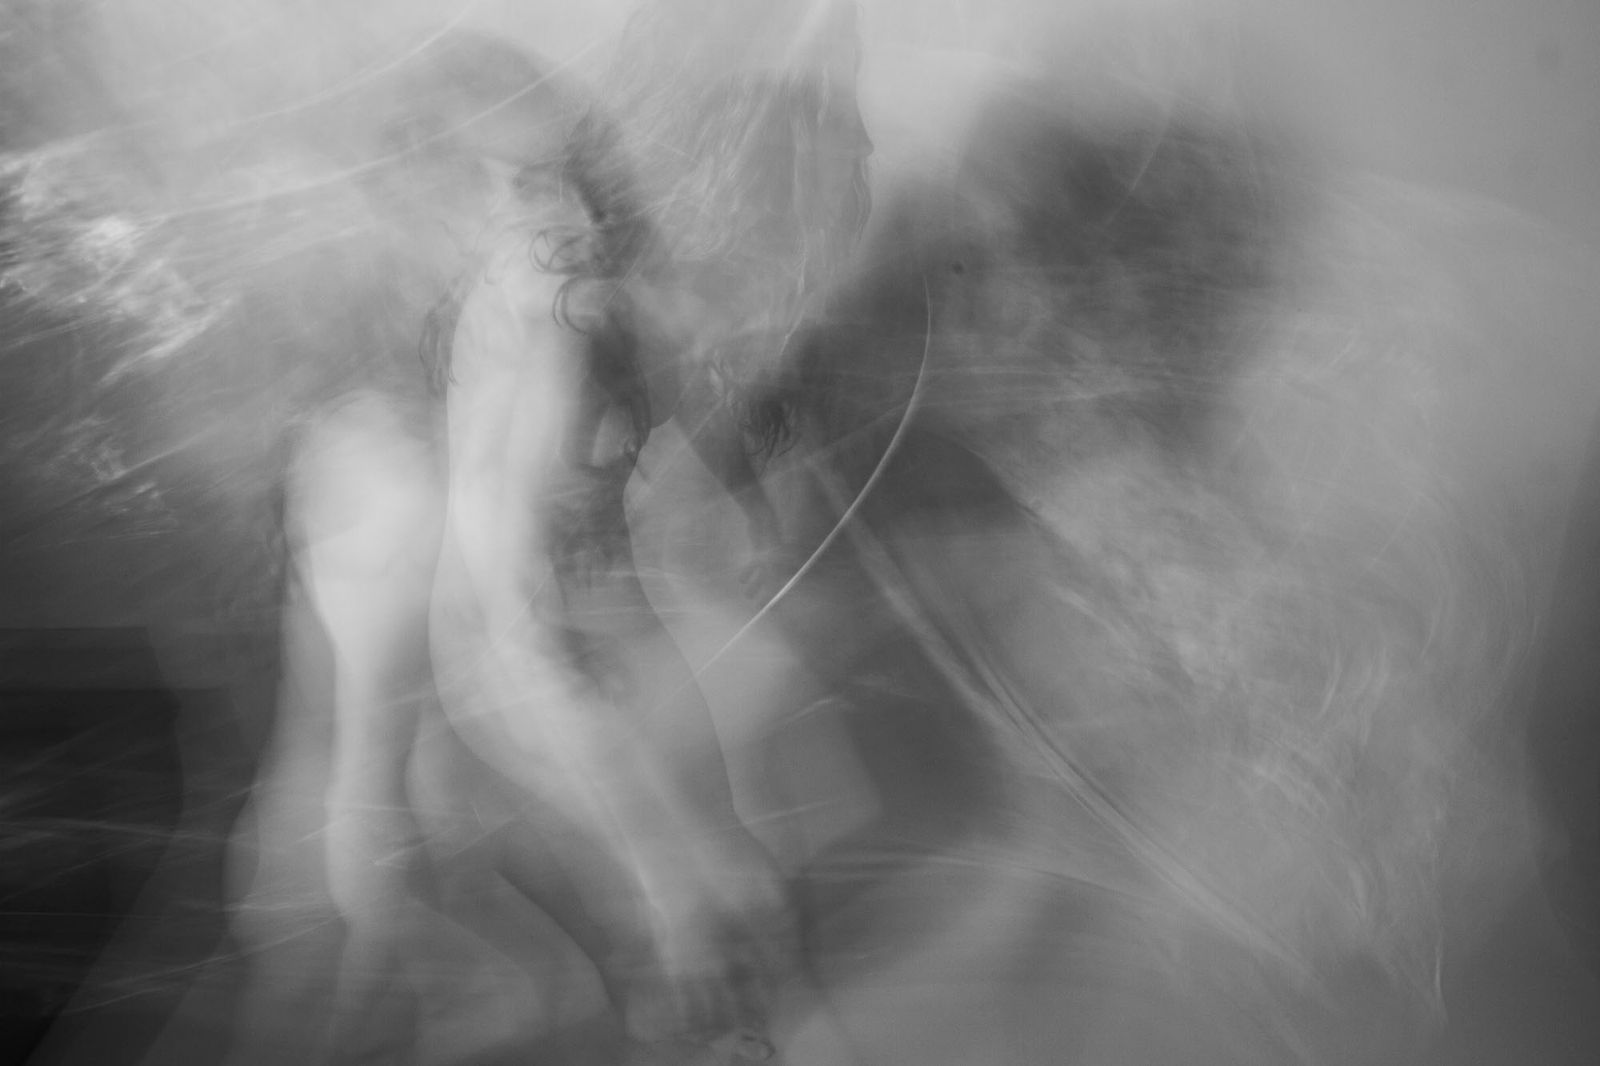 © Linda Zhengová - Image from the Catharsis photography project